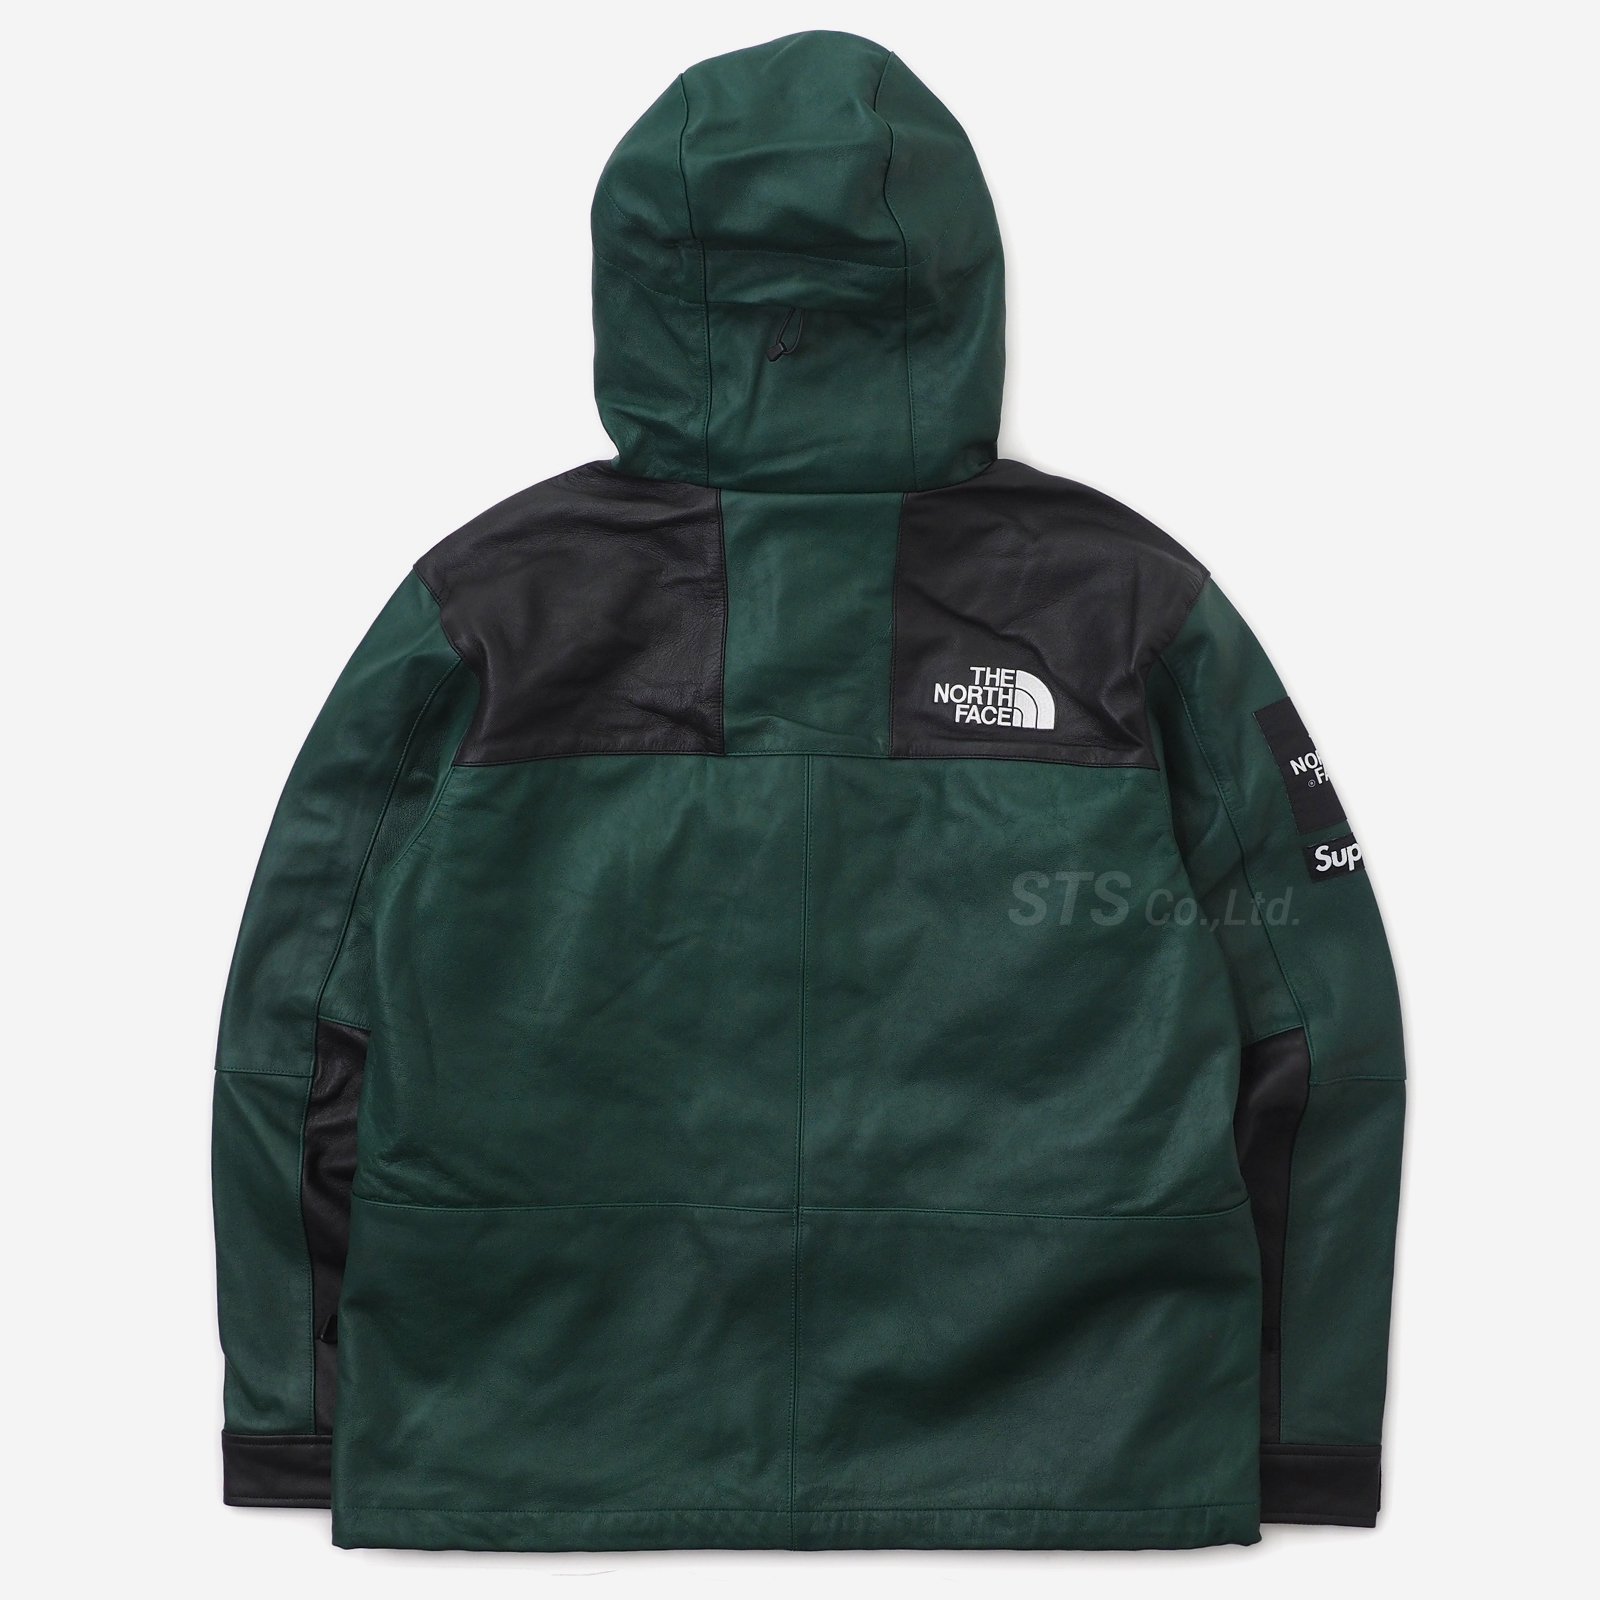 Supreme×THE NORTH FACE Leather Mountain